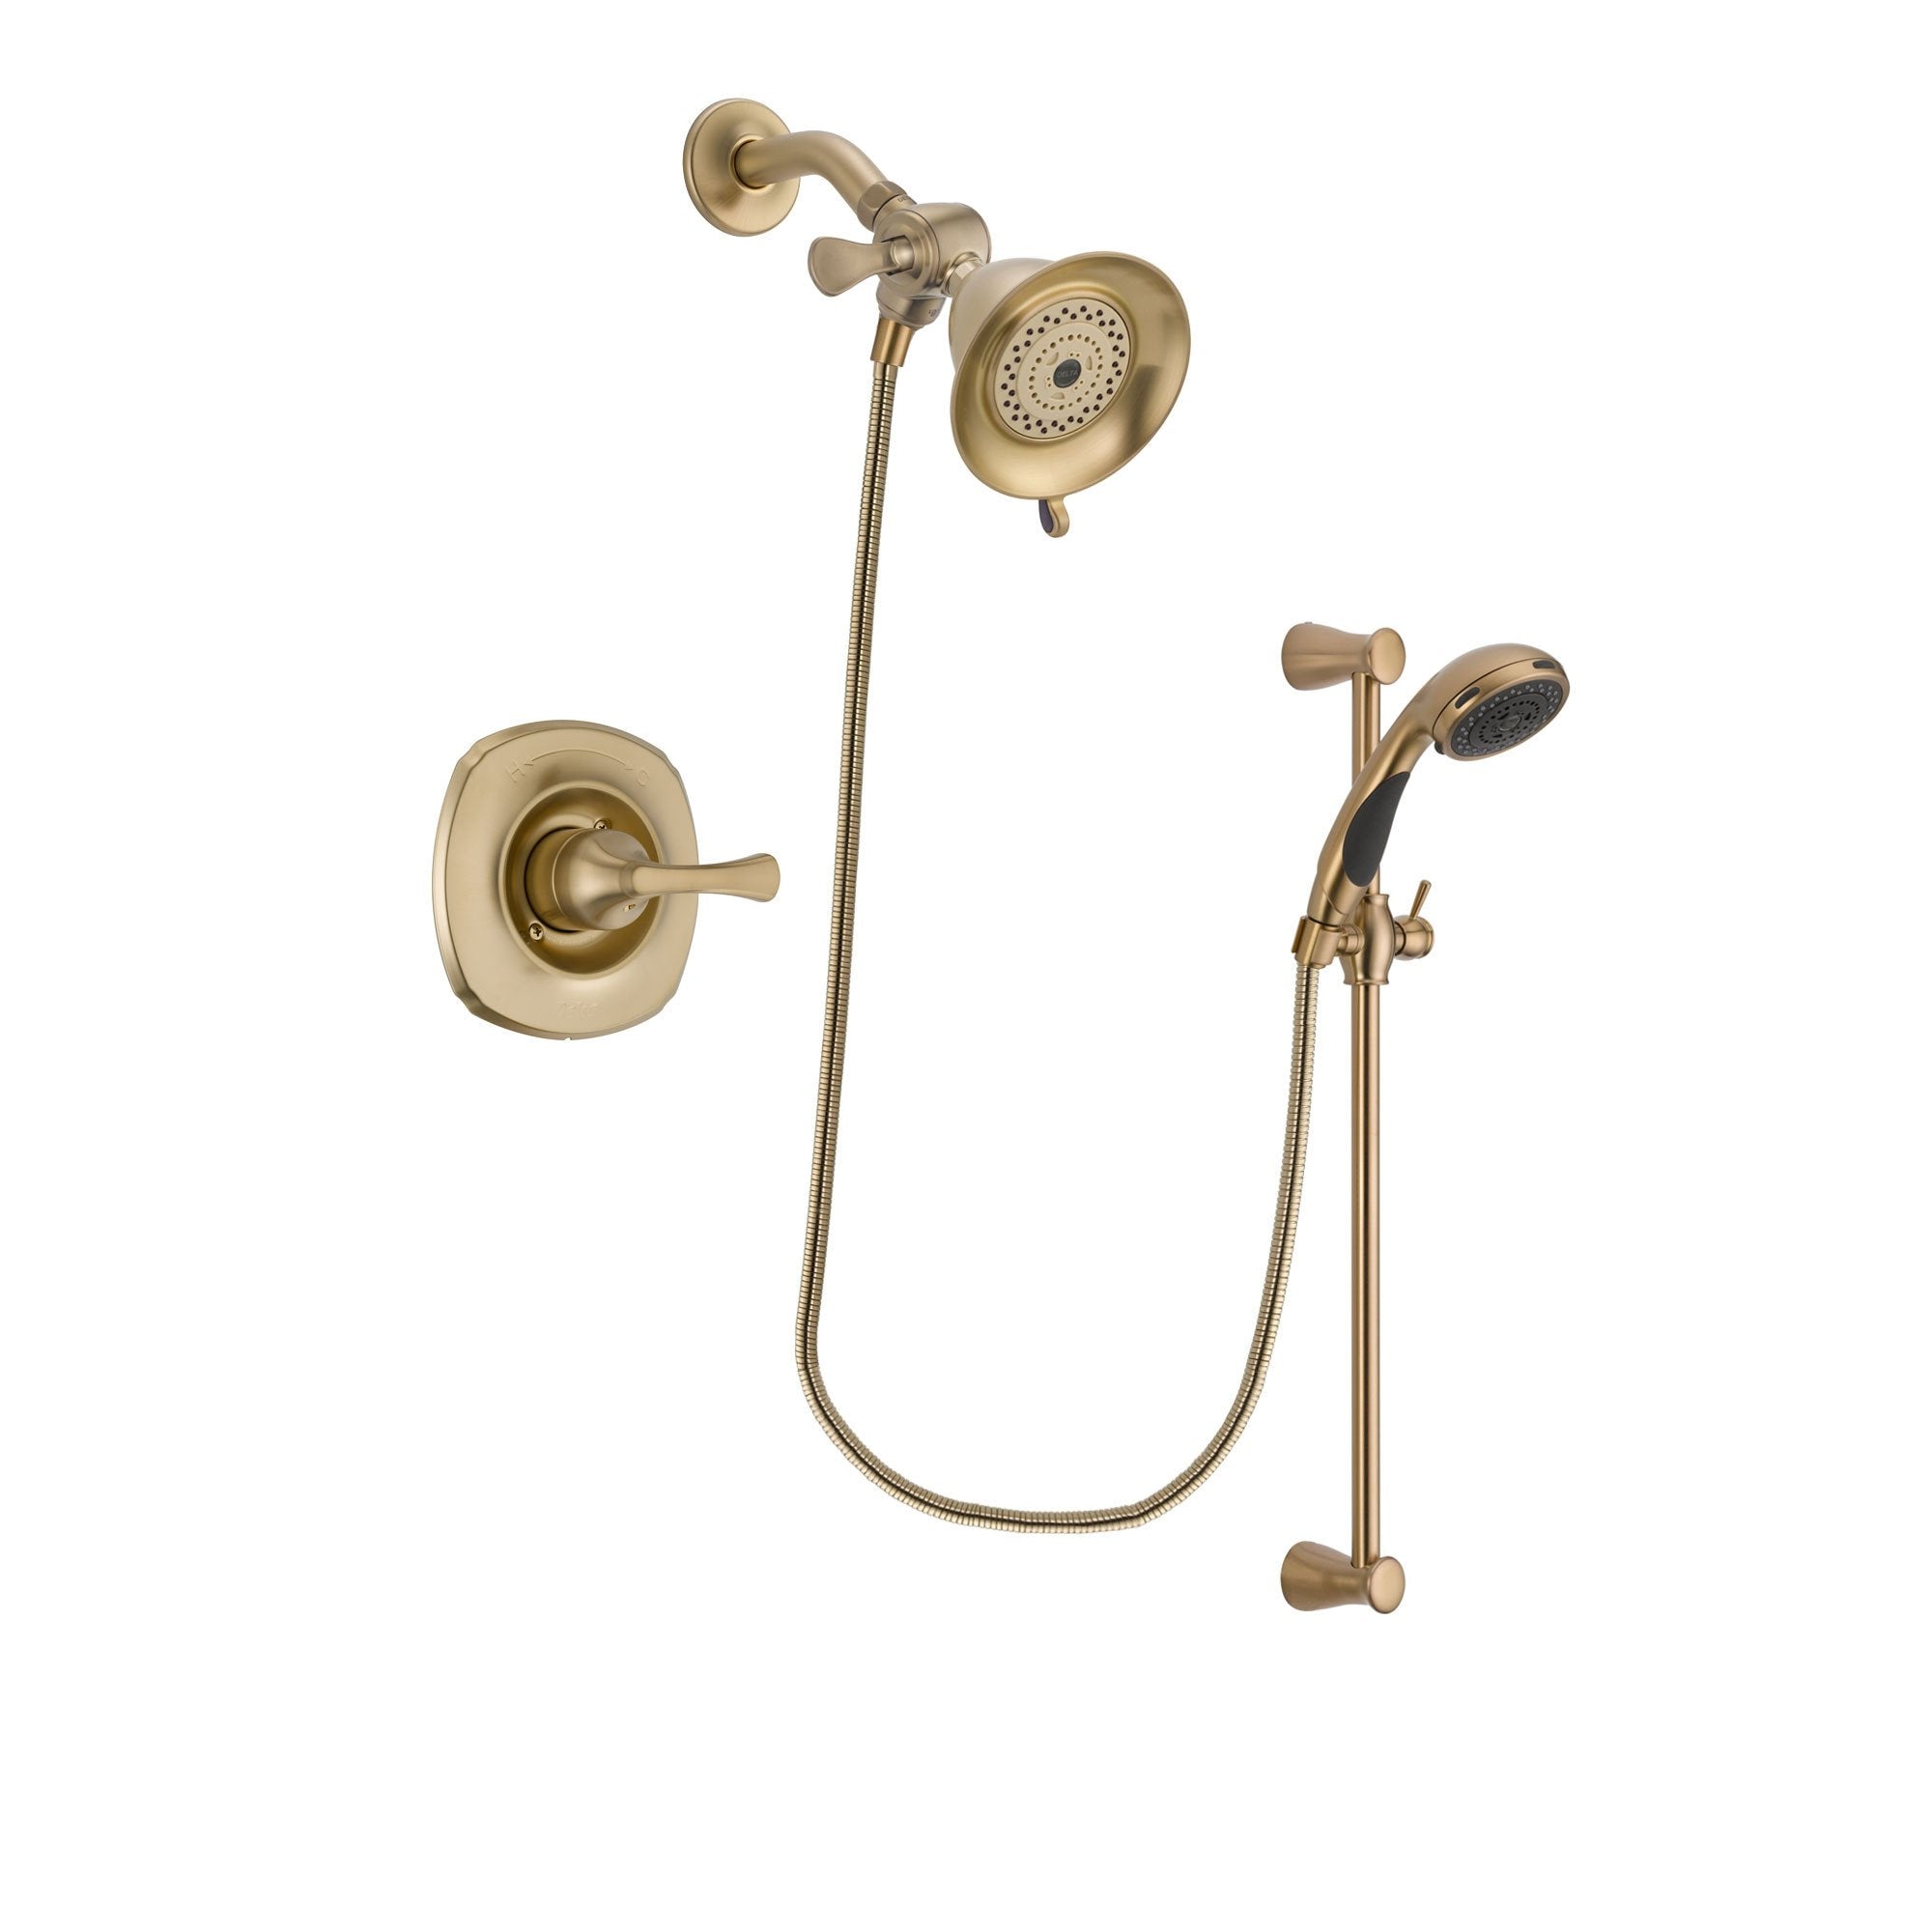 Delta Addison Champagne Bronze Finish Shower Faucet System Package with Water-Efficient Shower Head and Personal Handheld Shower Sprayer with Slide Bar Includes Rough-in Valve DSP3434V